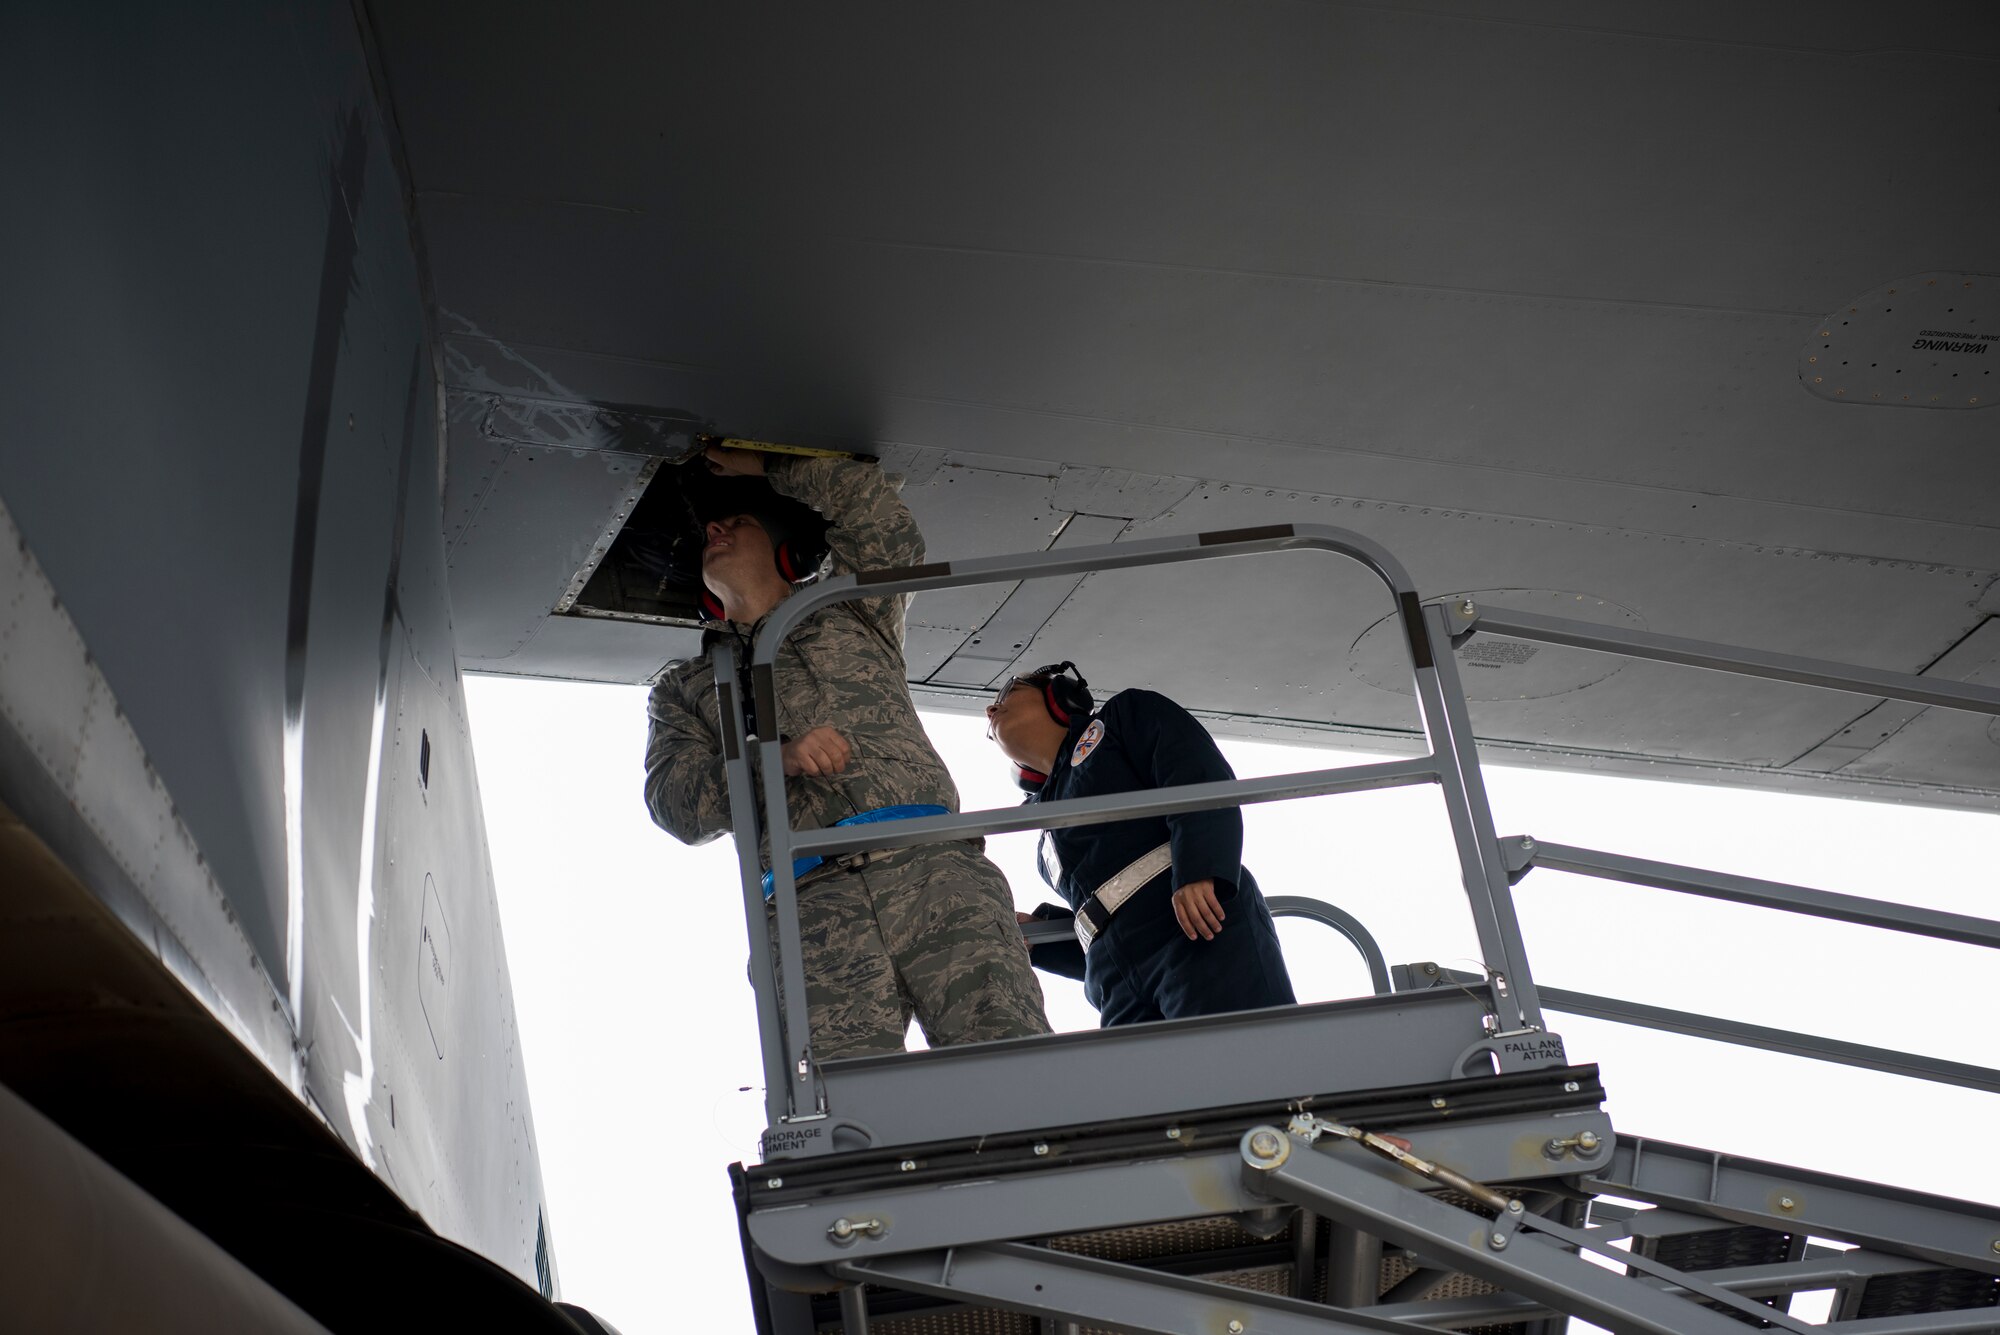 Master Sgt. Jeff Bejune, 512th Aircraft Maintenance Squadron C-17 hydraulic systems specialist, and Senior Airman Lourdes Cigarruista, 512th Maintenance Squadron C-5 hydraulic systems specialist, from Dover Air Force Base, Del., look for a hydraulic leak on a C-5M Super Galaxy at Ramstein Air Base, Germany, Nov. 29, 2018. More than 30 U.S. Air Force Reserve aircraft maintainers assigned to the 512th Airlift Wing augmented flight line maintenance operations for two weeks during a first-of-its-kind C-5 training session at Ramstein AB. (U.S. Air Force photo by Staff Sgt. Aaron J. Jenne)